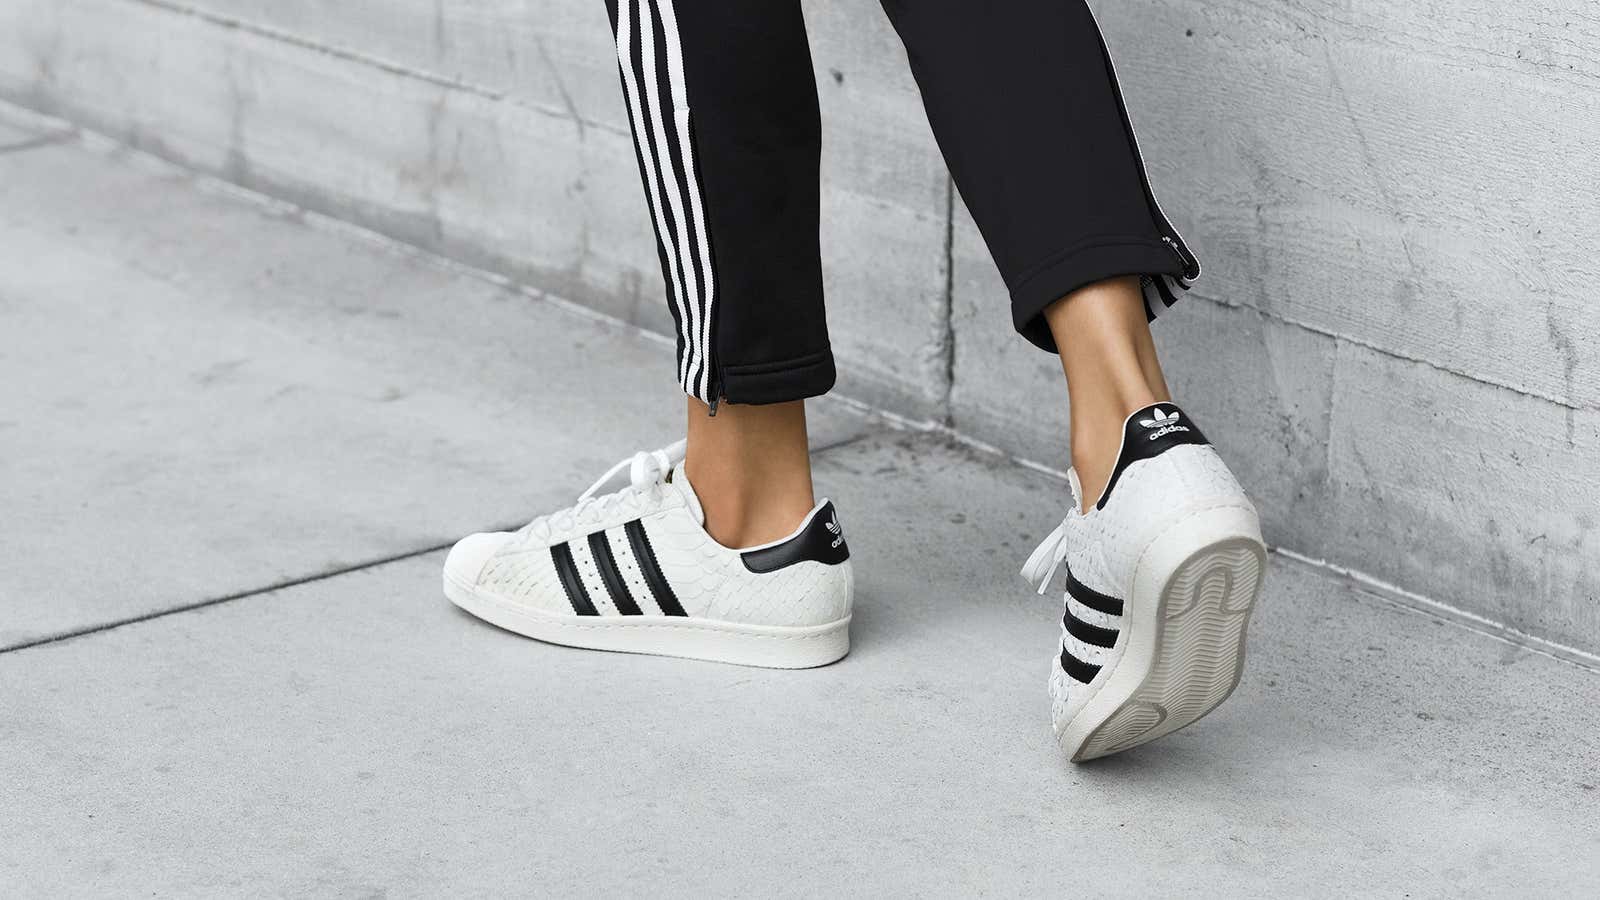 The top 10 best-selling in 2016: Adidas beats Nike